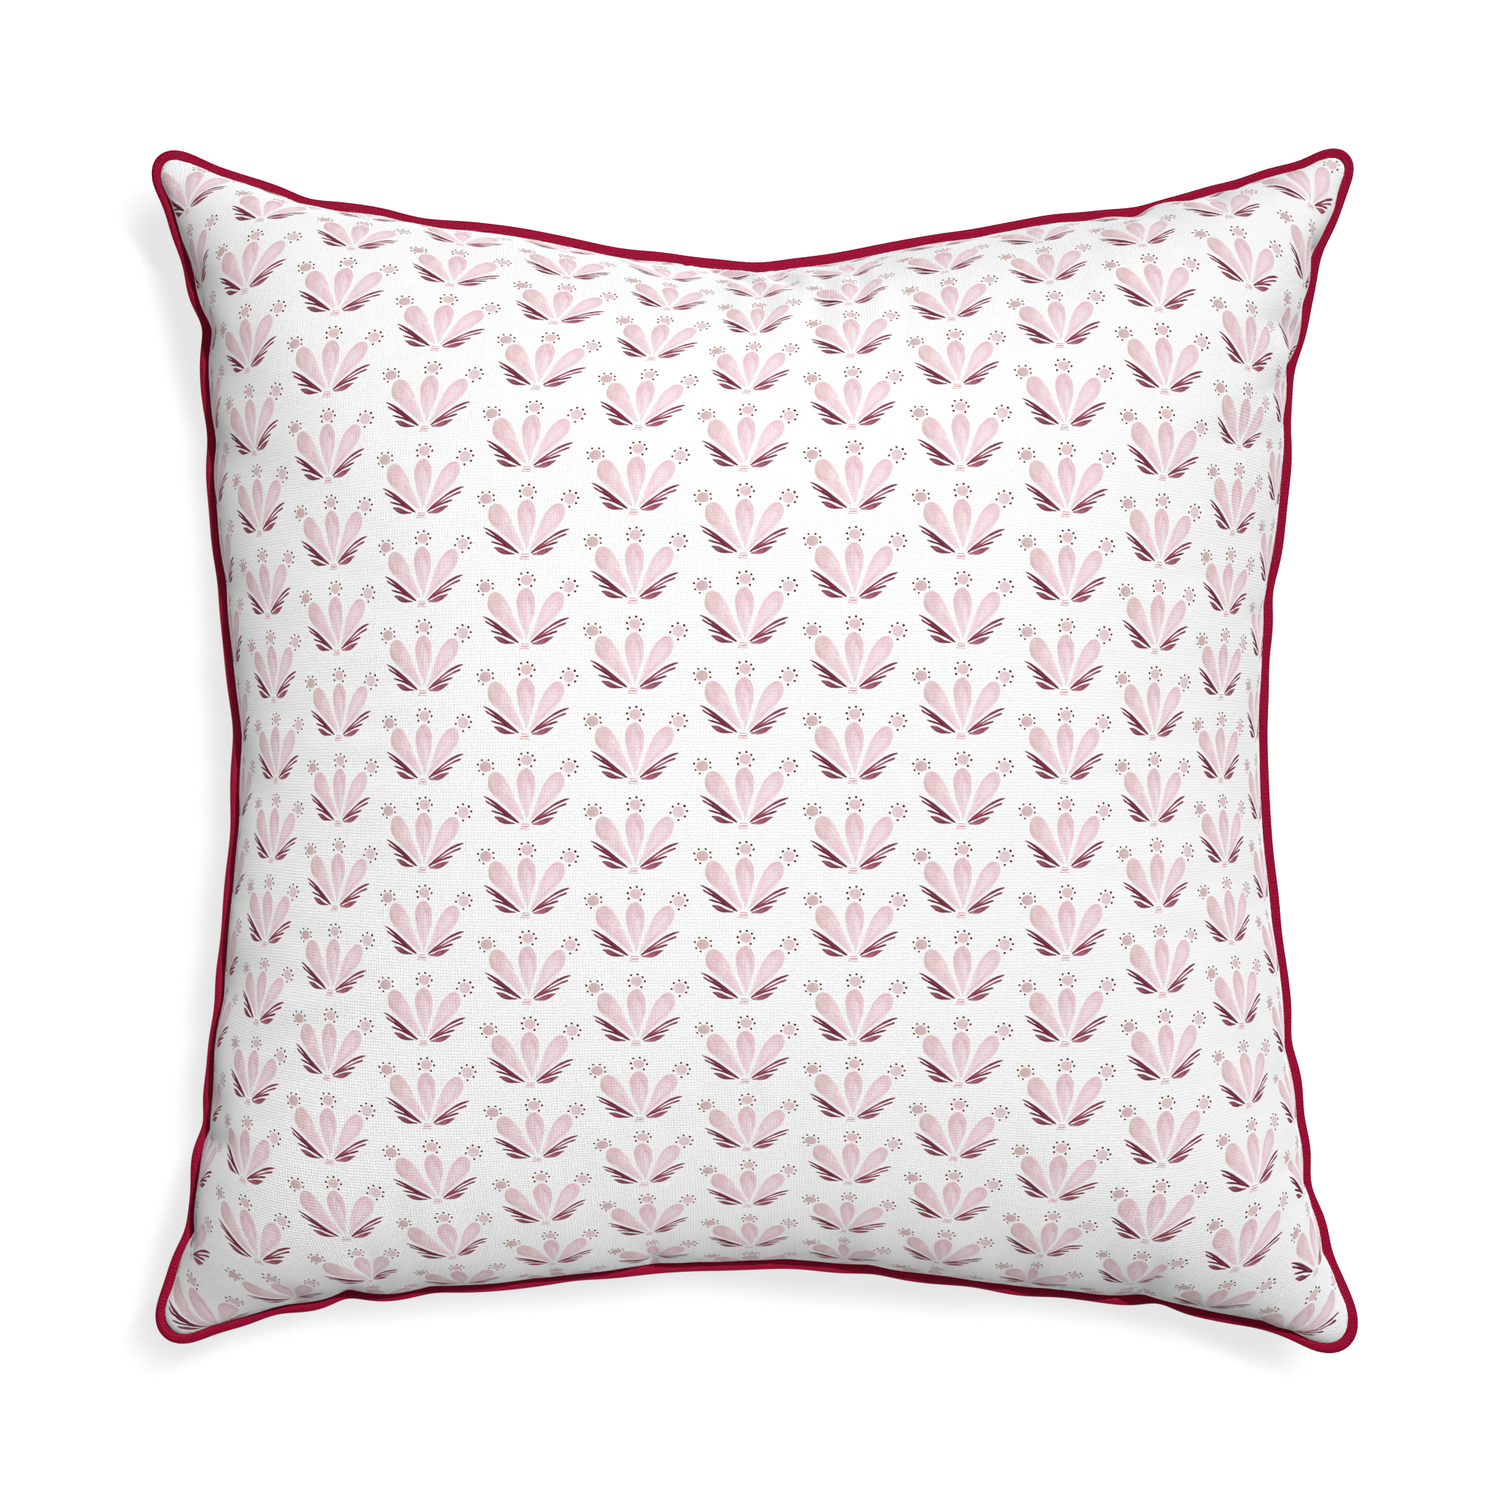 Euro-sham serena pink custom pink & burgundy drop repeat floralpillow with raspberry piping on white background